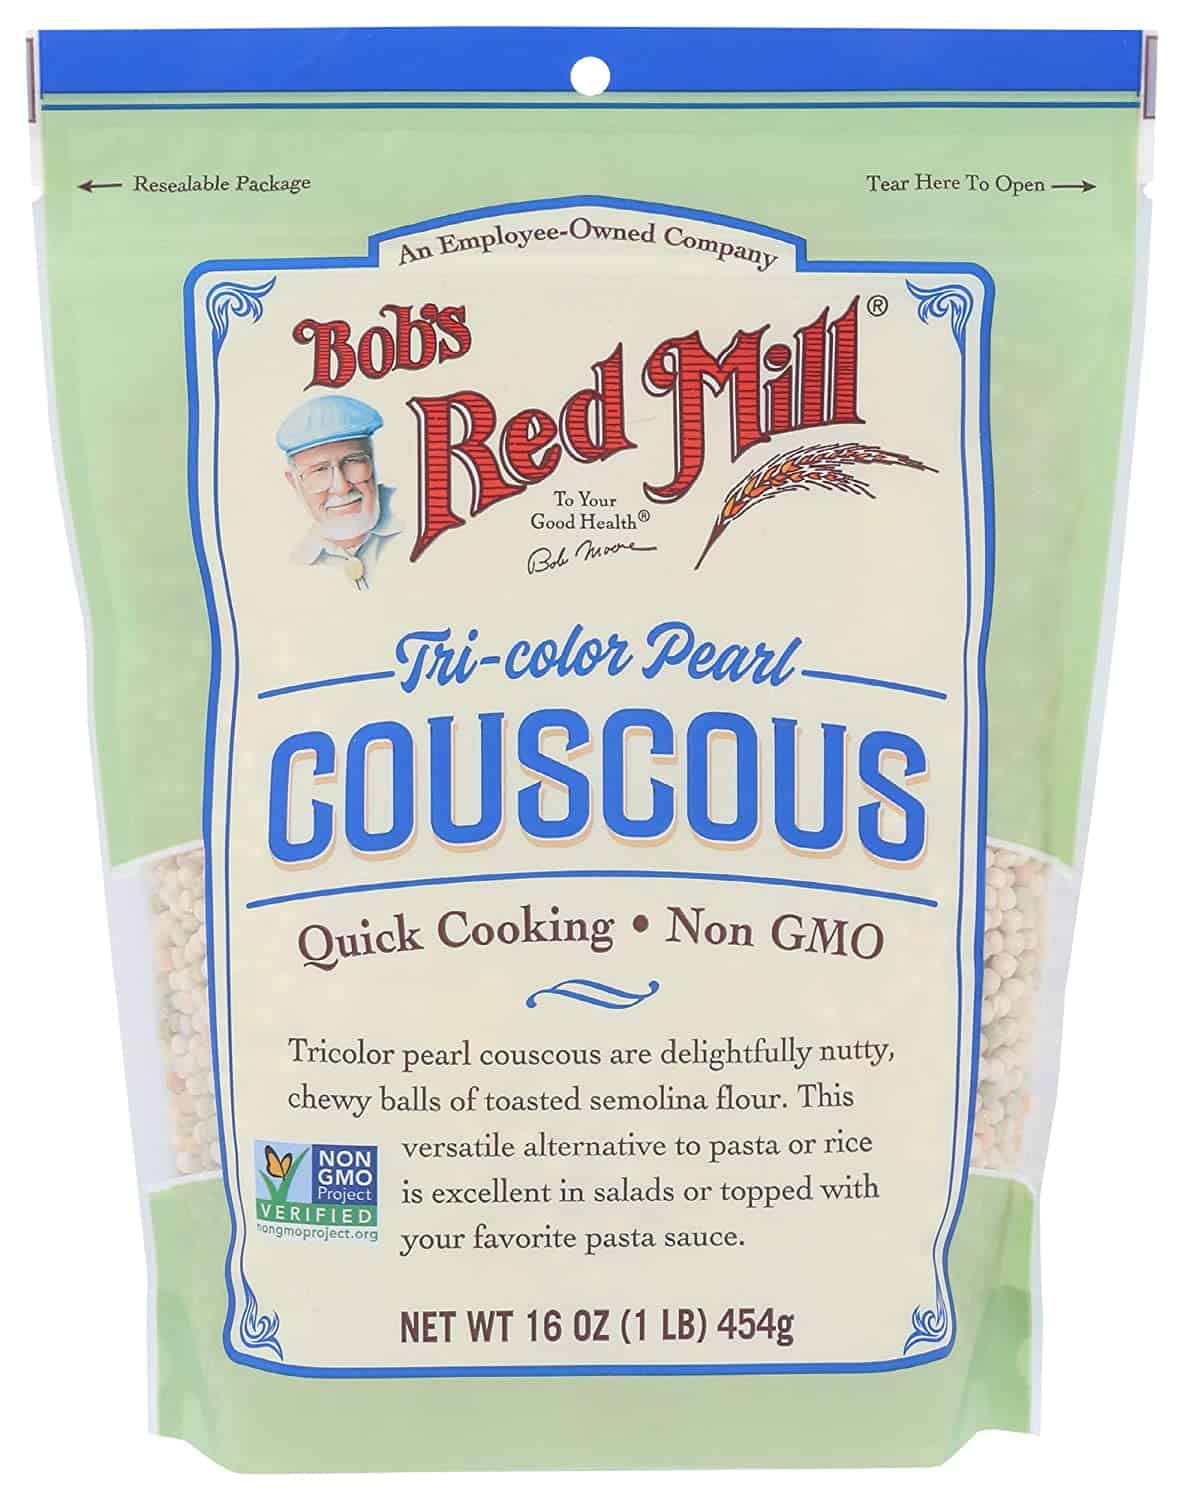 Couscous as a substitute for basmati rice